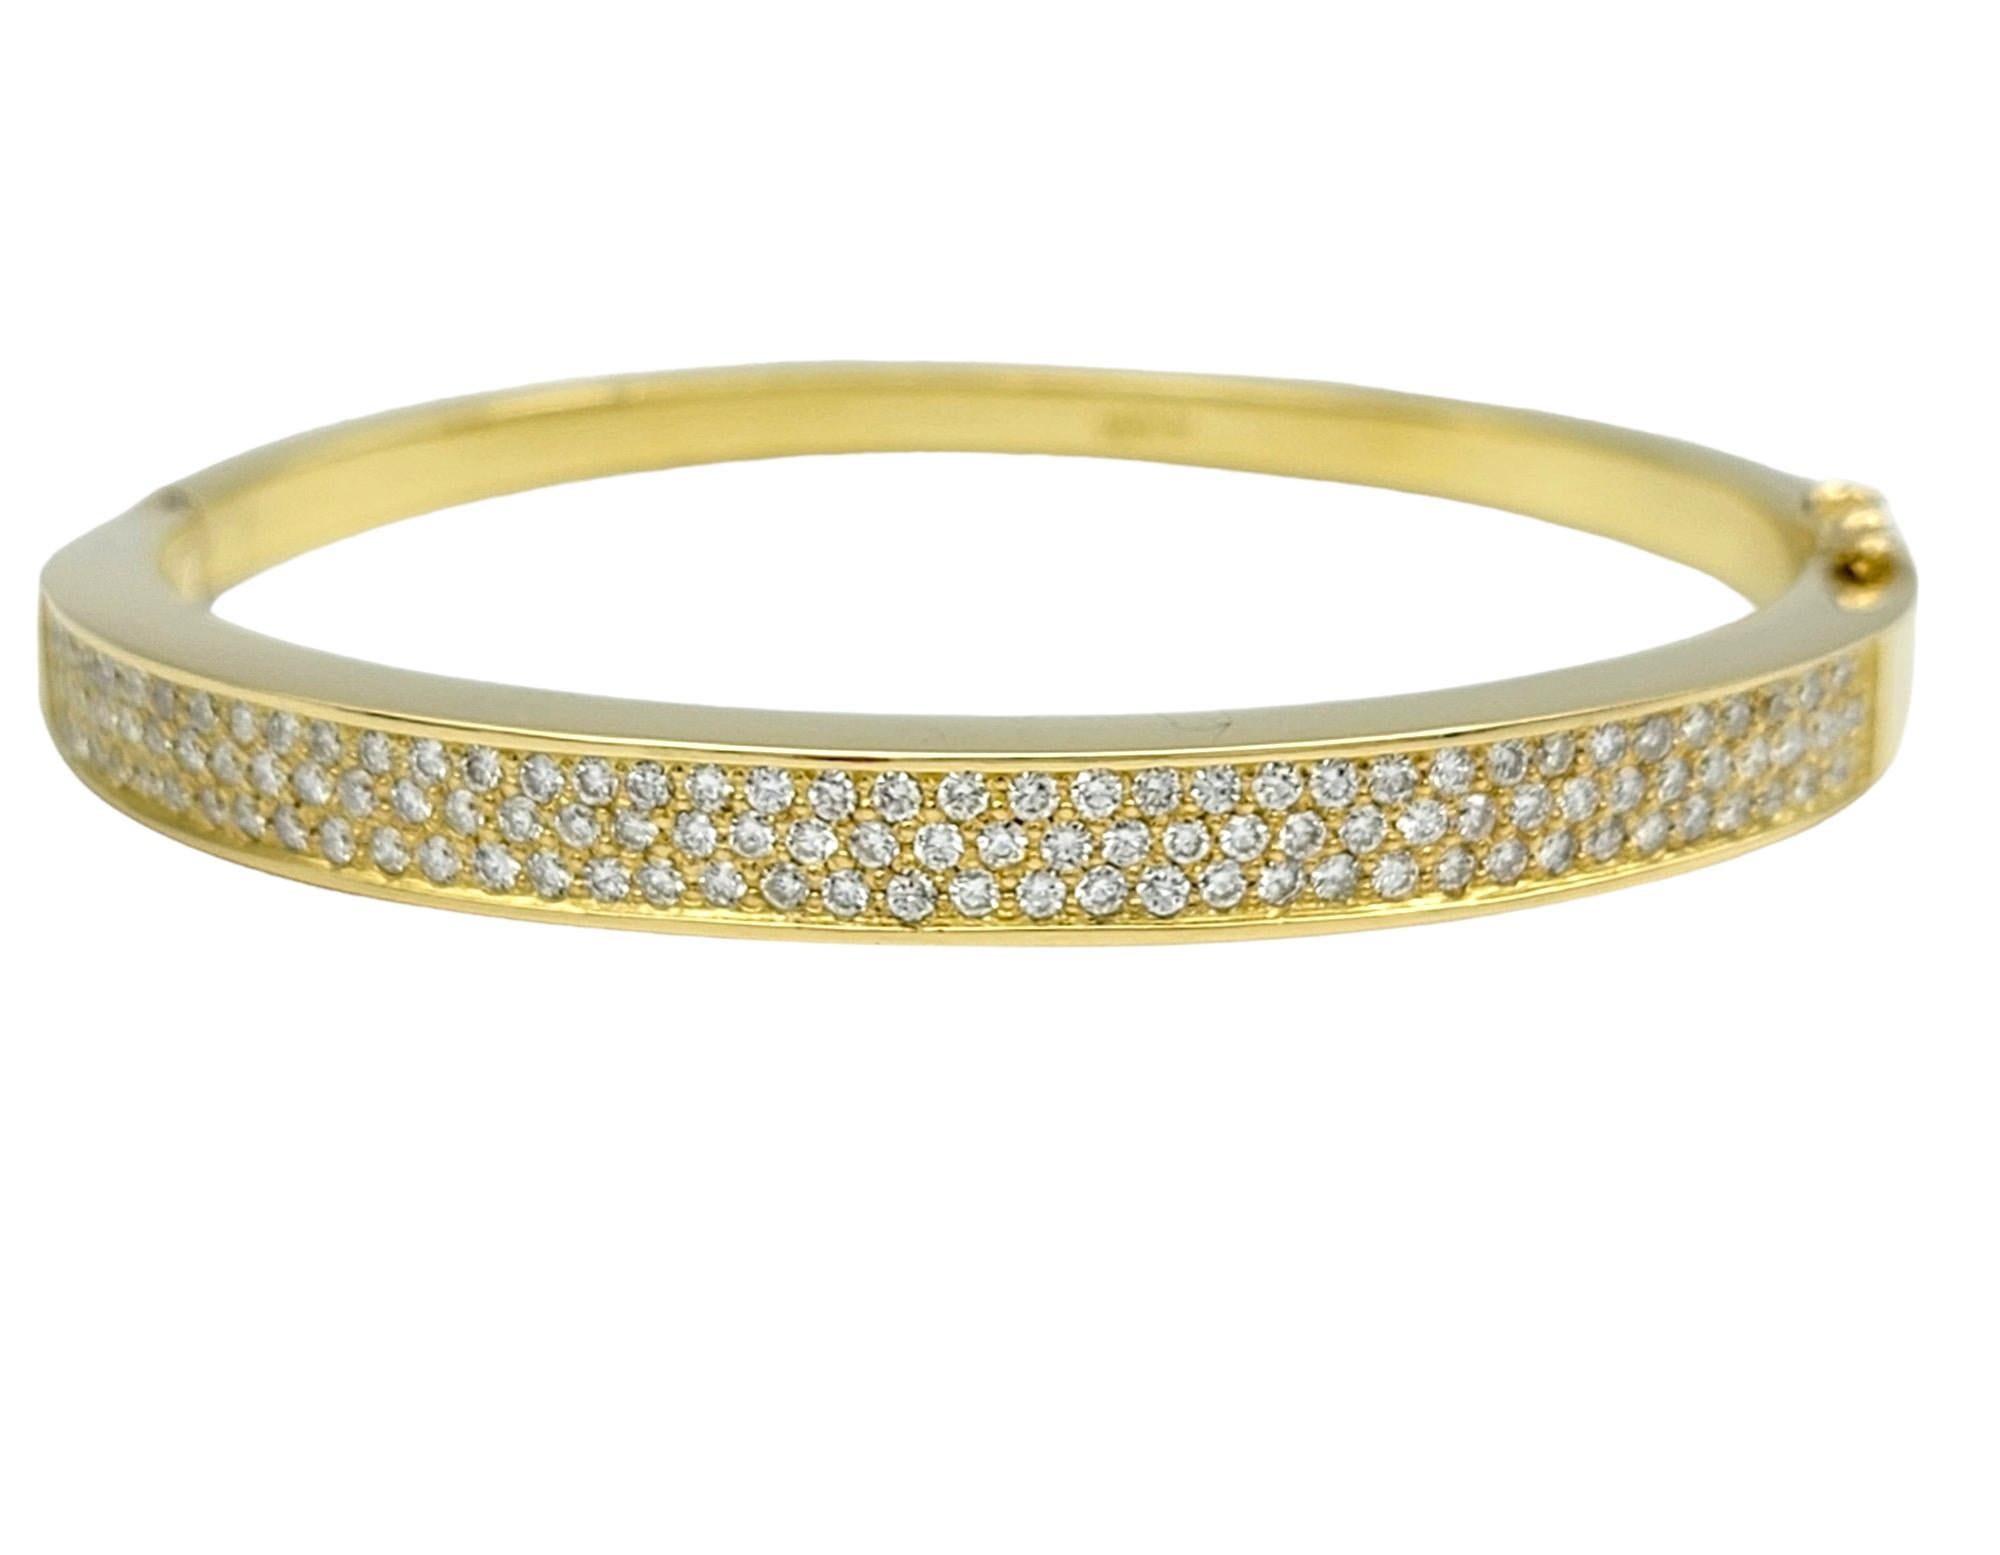 The inner circumference of this bracelet measures 6.38 inches and will comfortably fit up to a 6.25 inch wrist. 

This diamond pave hinged bangle bracelet exudes timeless elegance, crafted in lustrous 18 karat yellow gold. Adorned with a sparkling